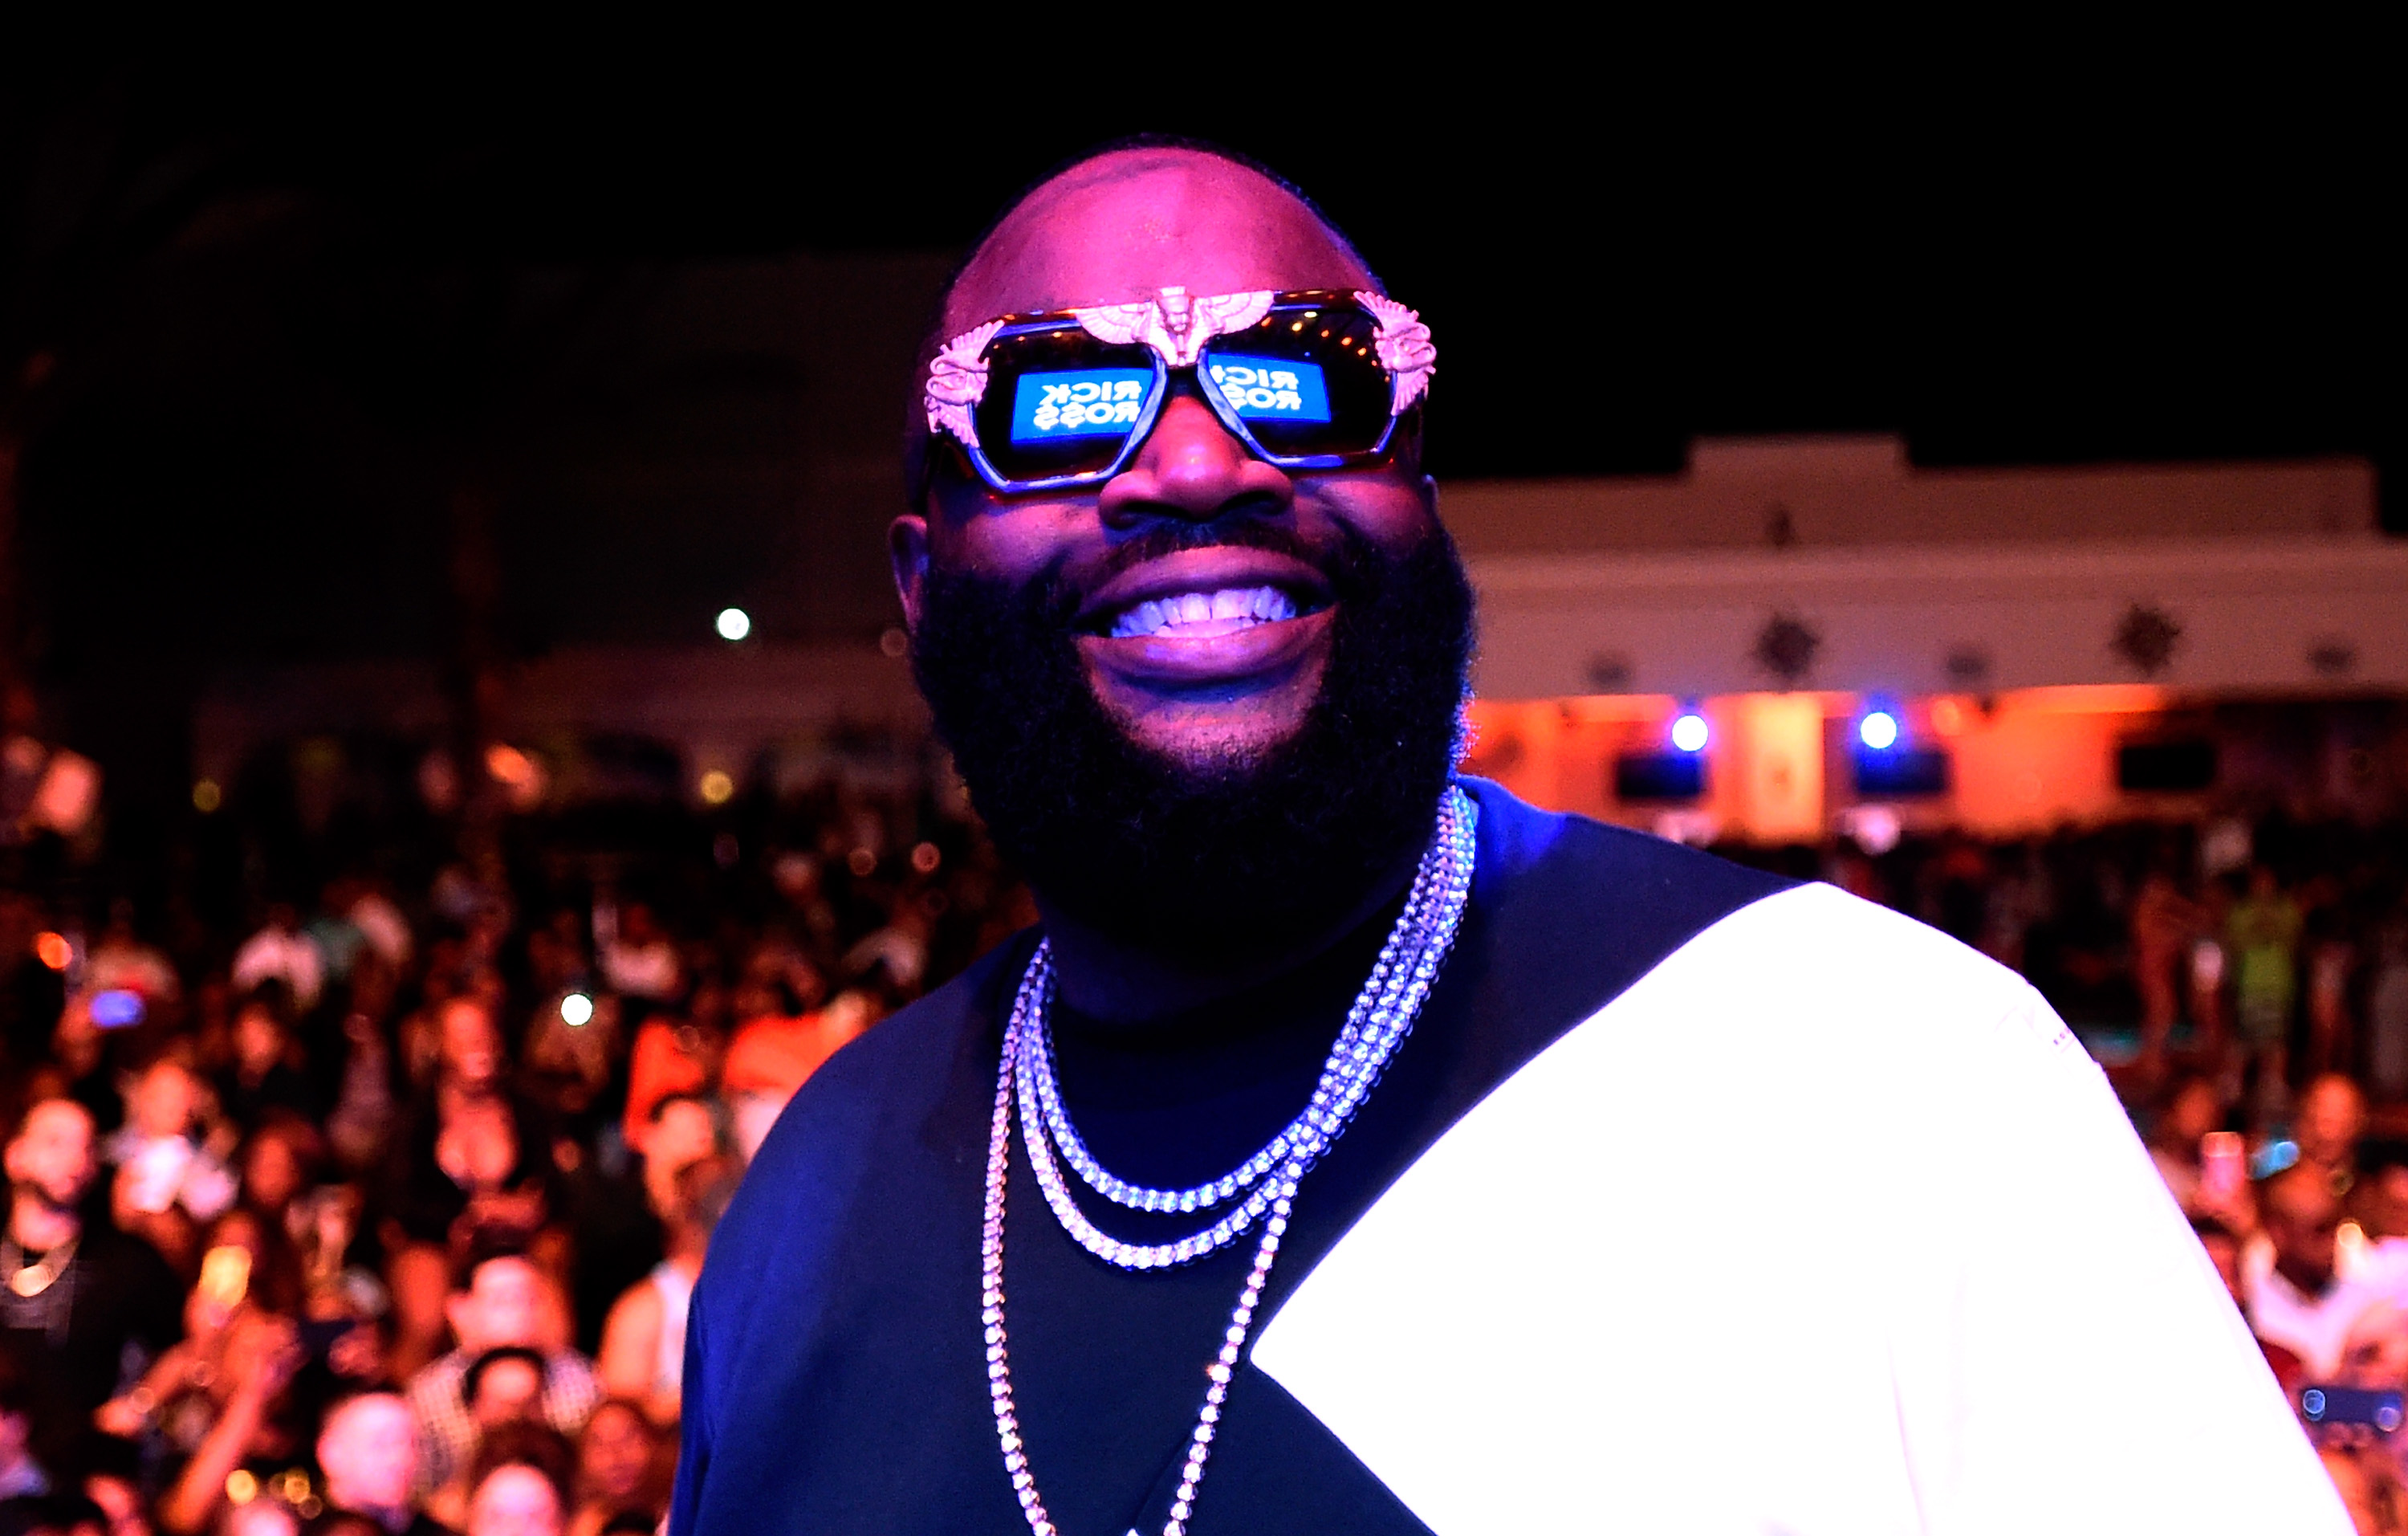 Official Eclipse Launch Party At Daylight Beach Club With Host Rick Ross